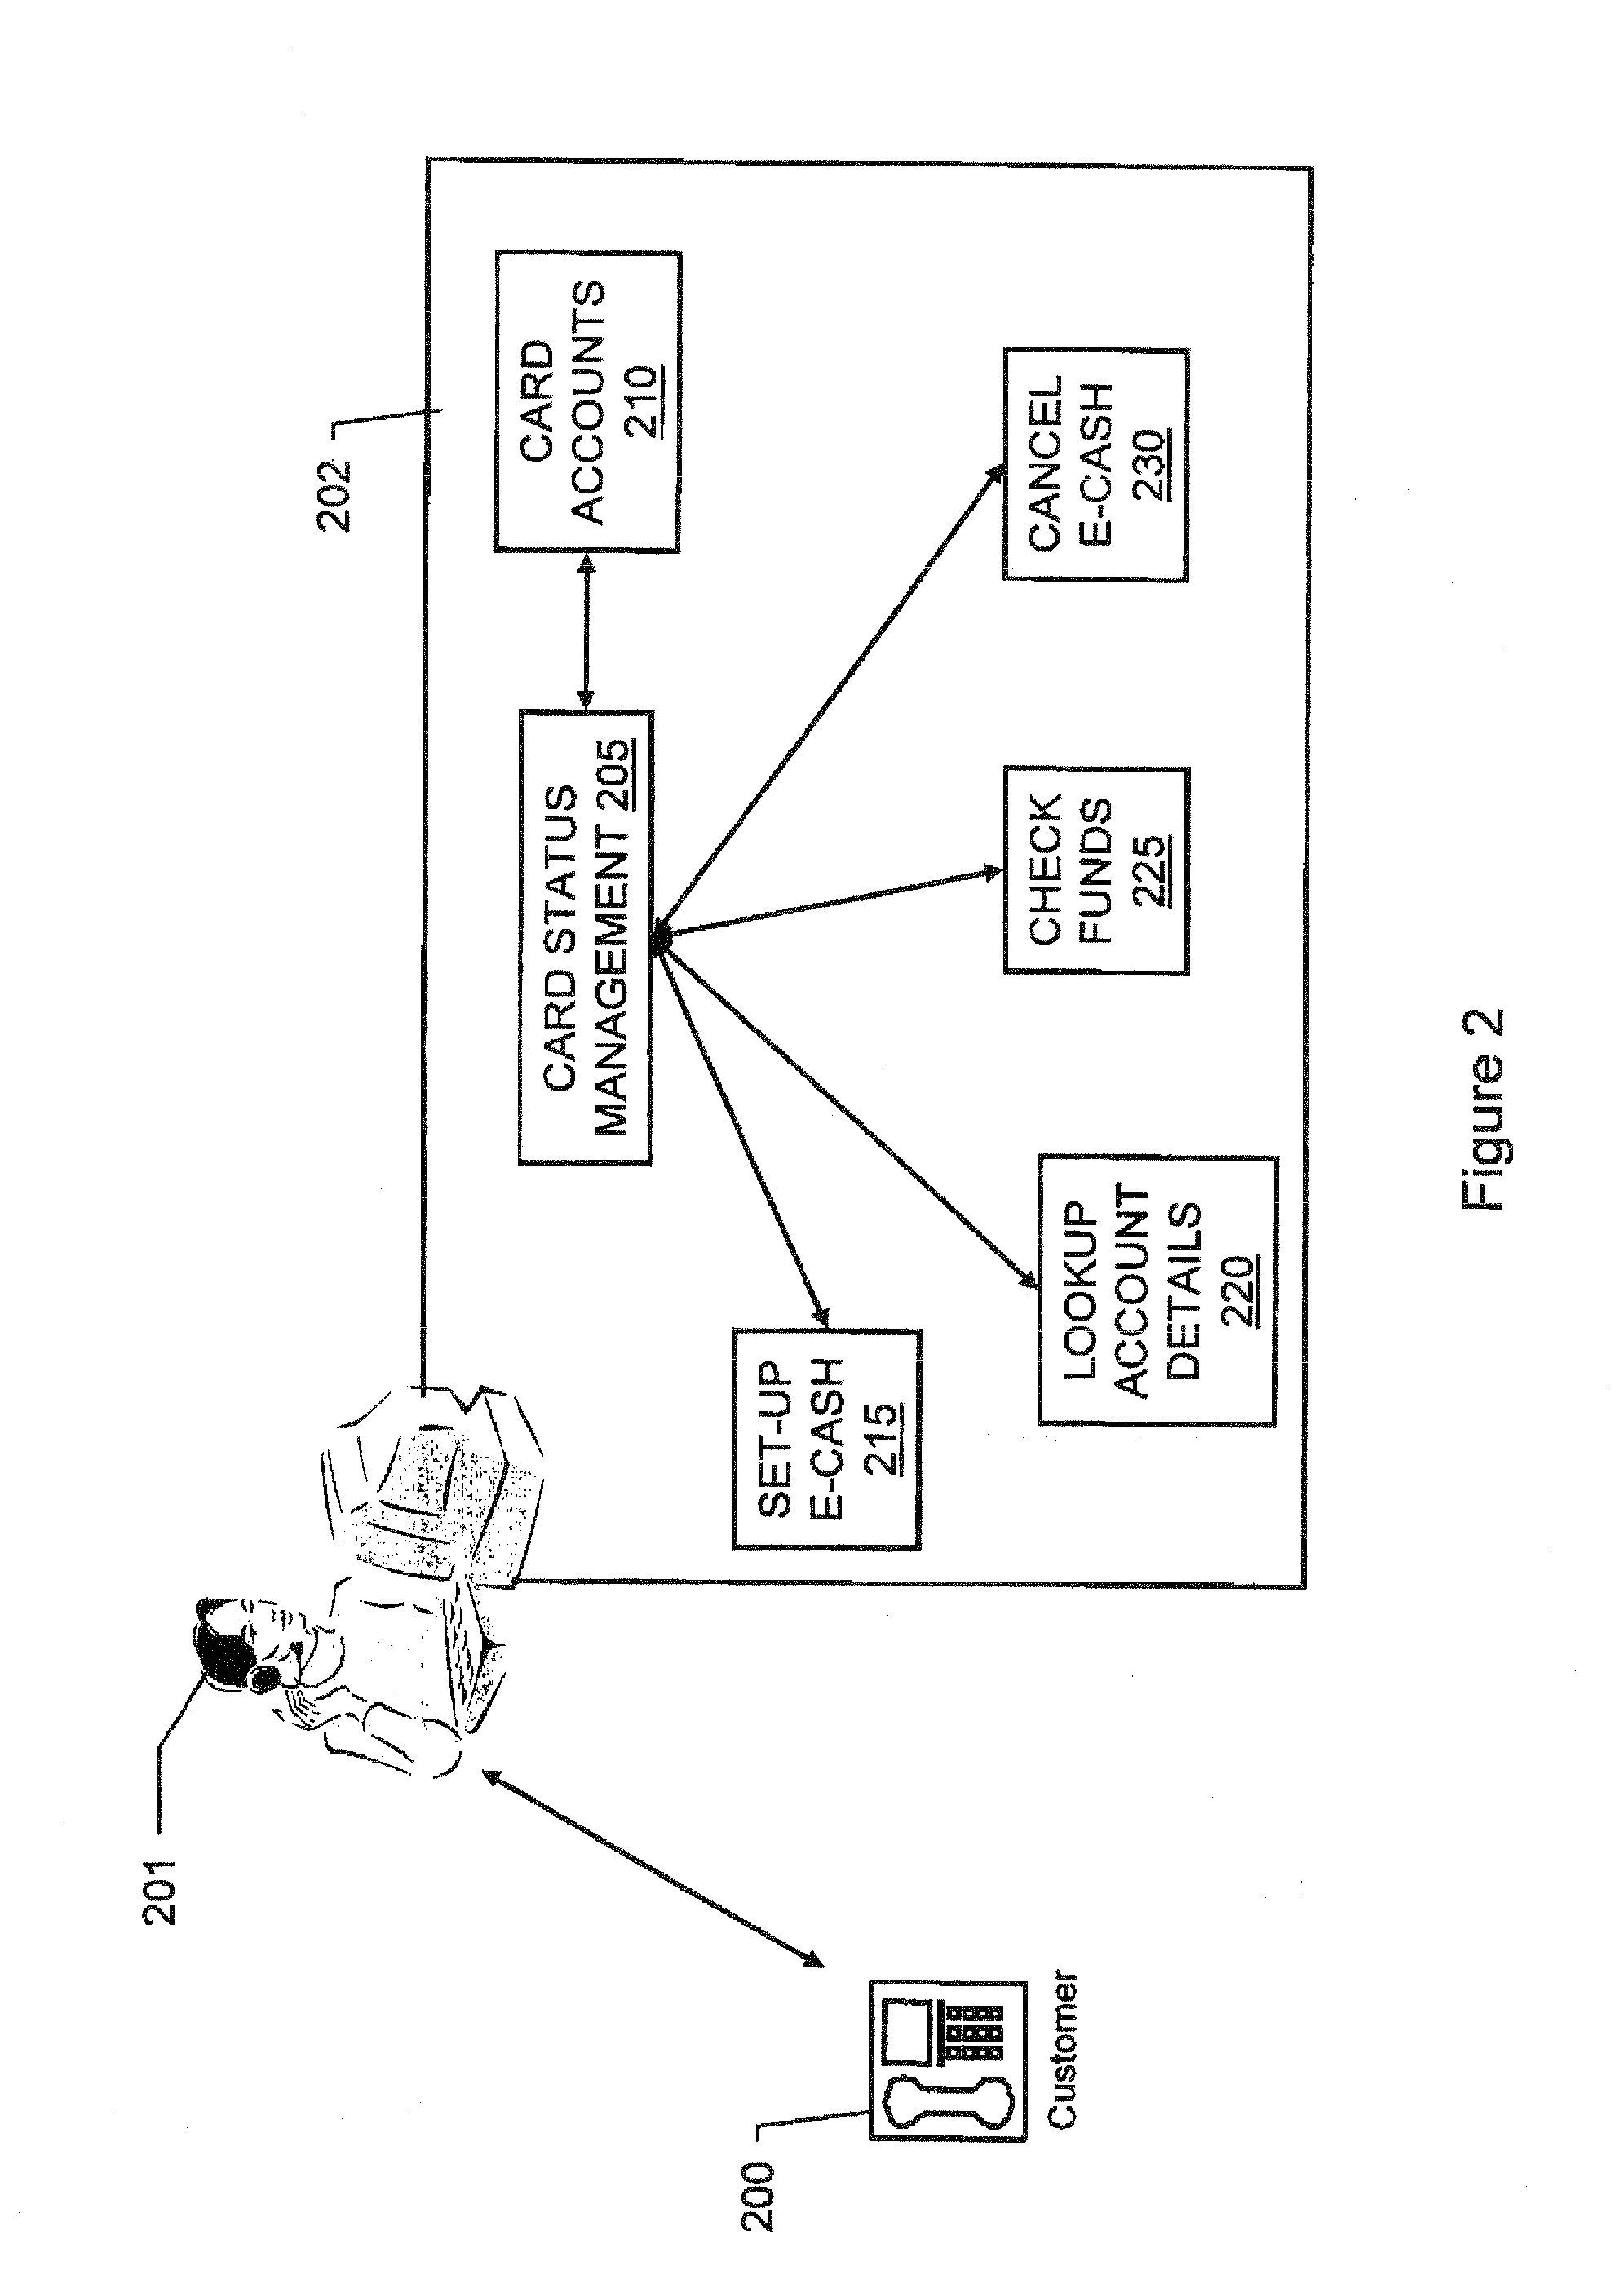 Methods and systems for managing loss or theft of ATM cards